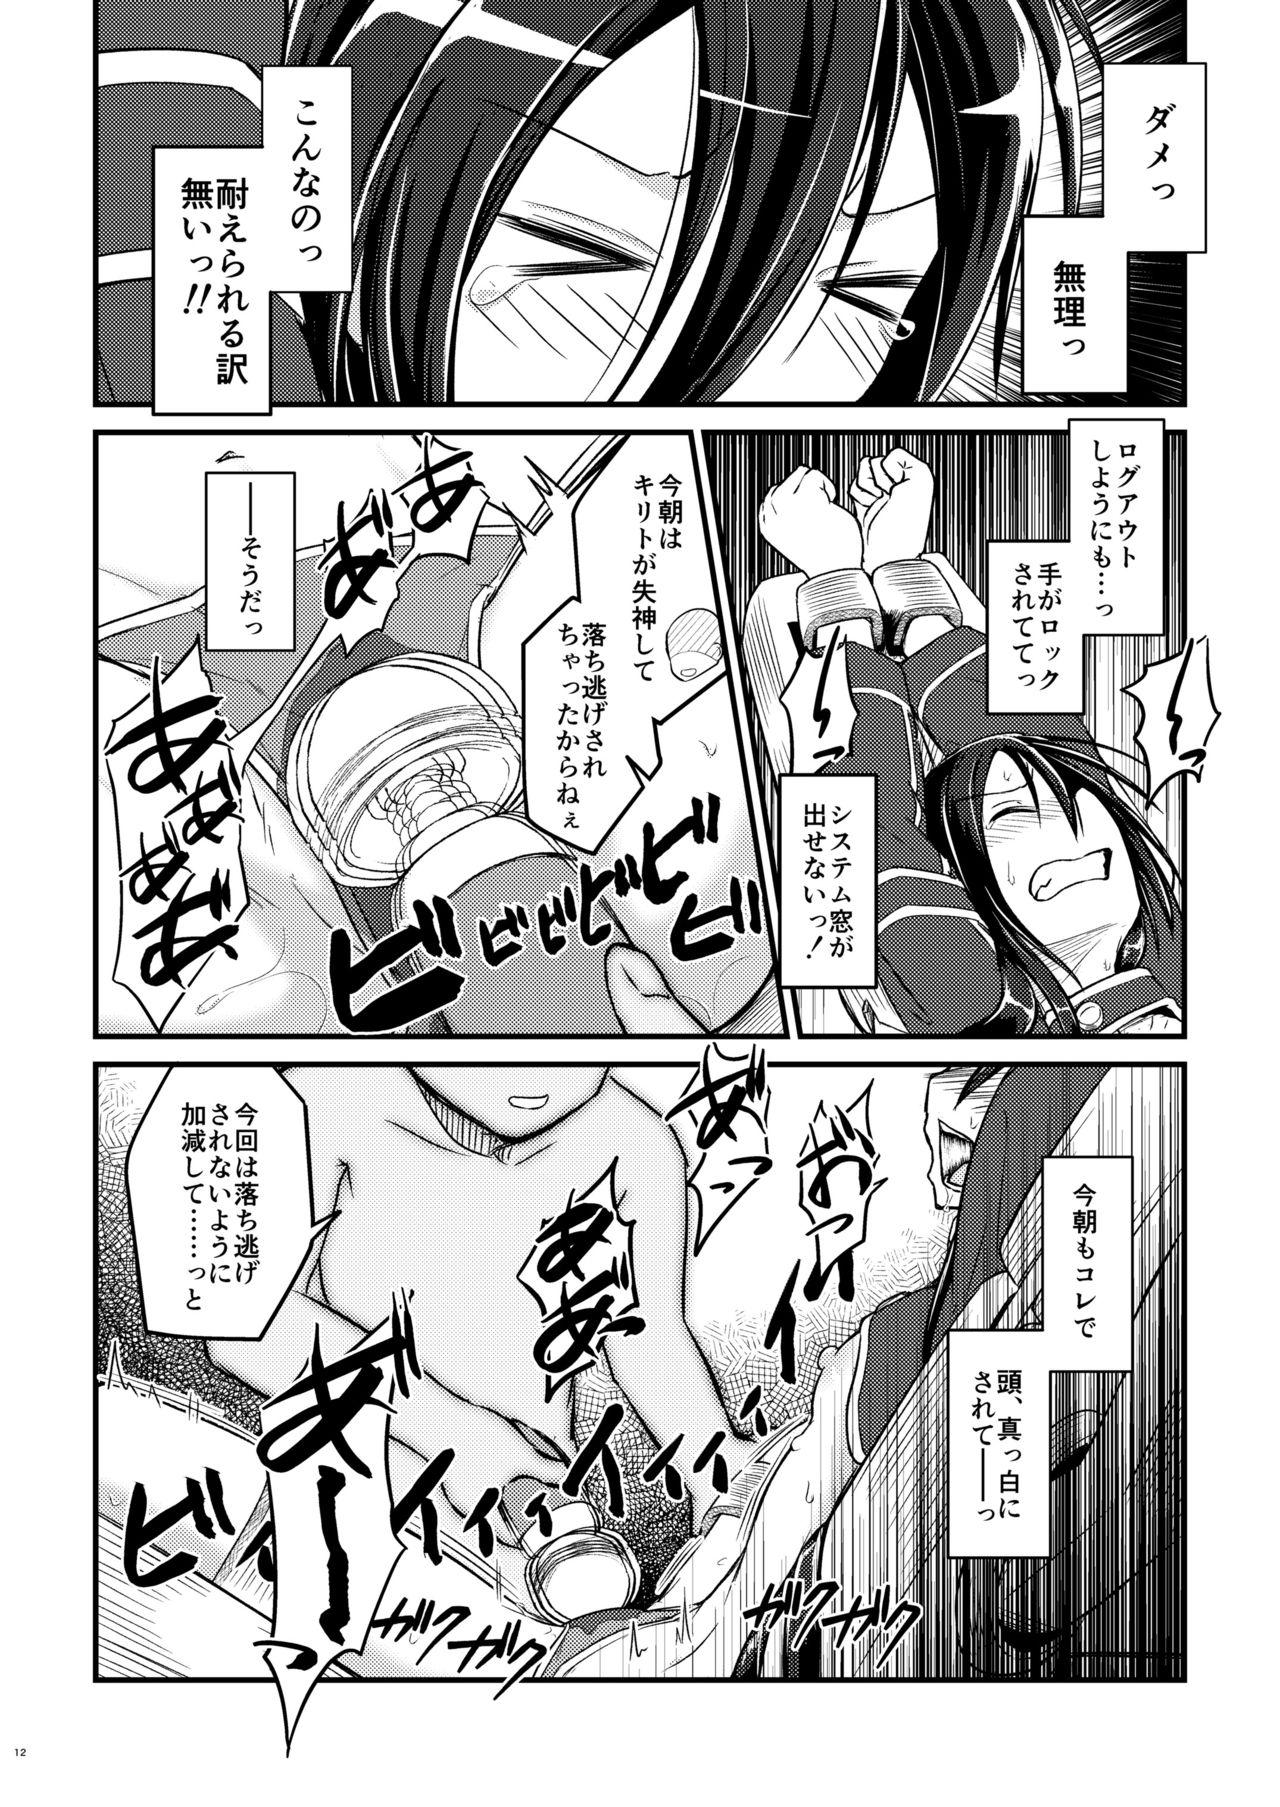 High Kiriko Route Another A Part Set - Sword art online Whipping - Page 11